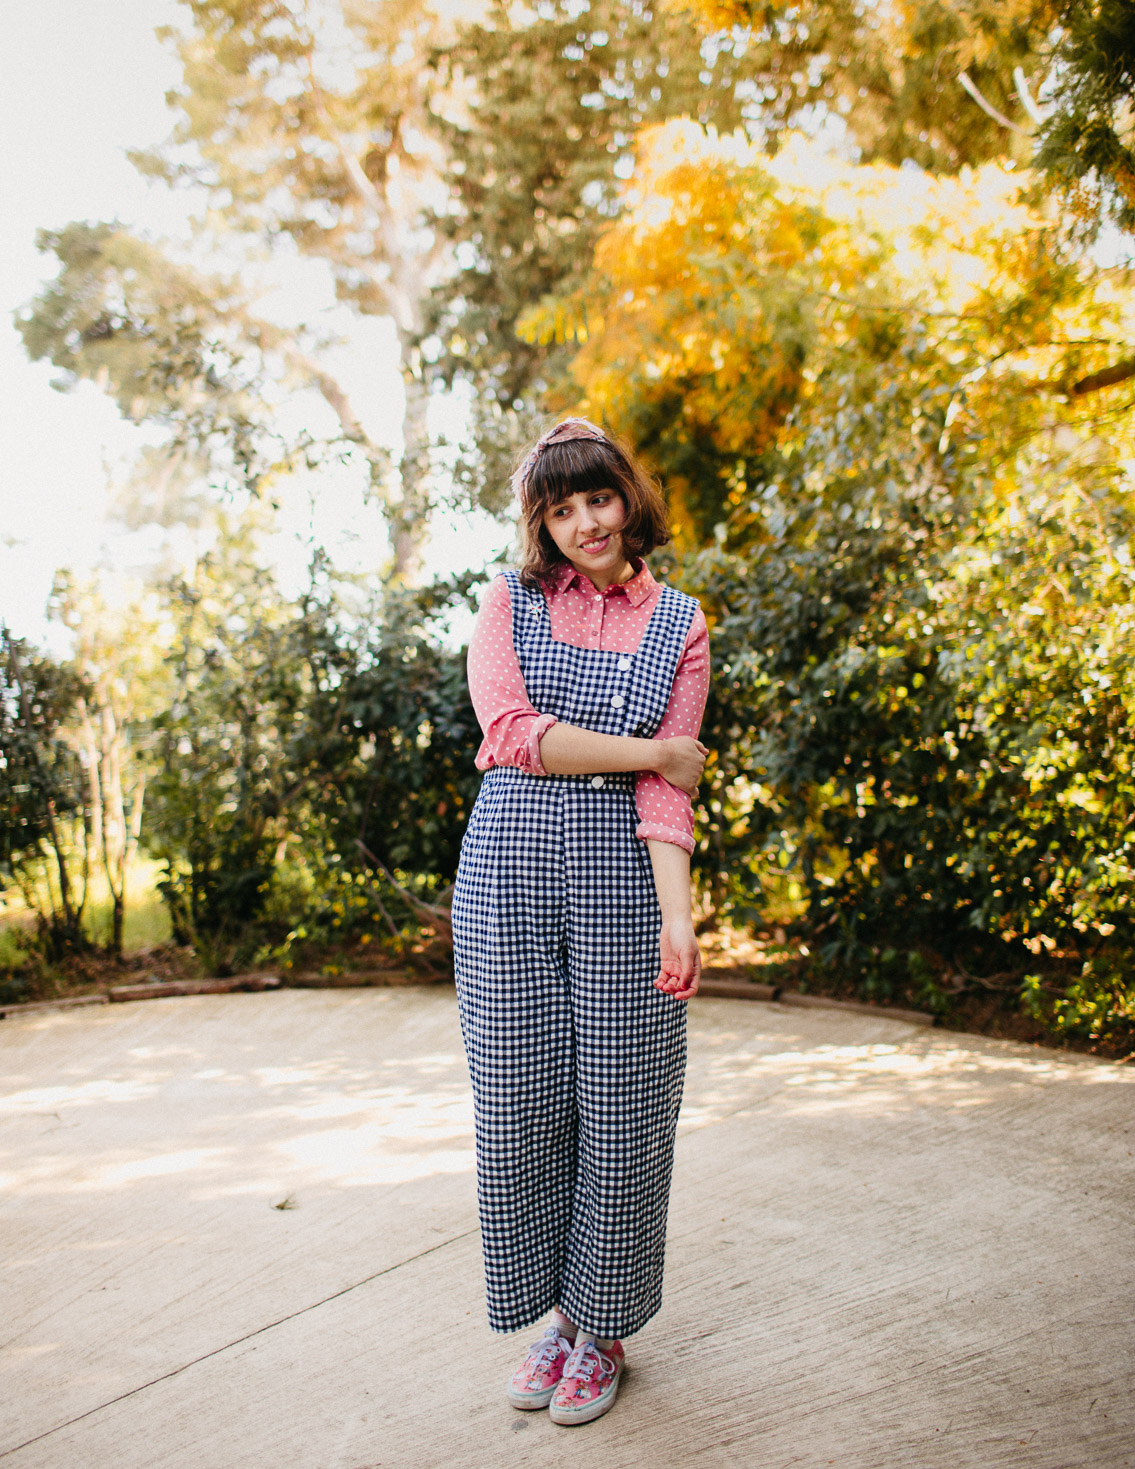 Gingham jumpsuit, dotted pink shirt and headband - The cat, you and us